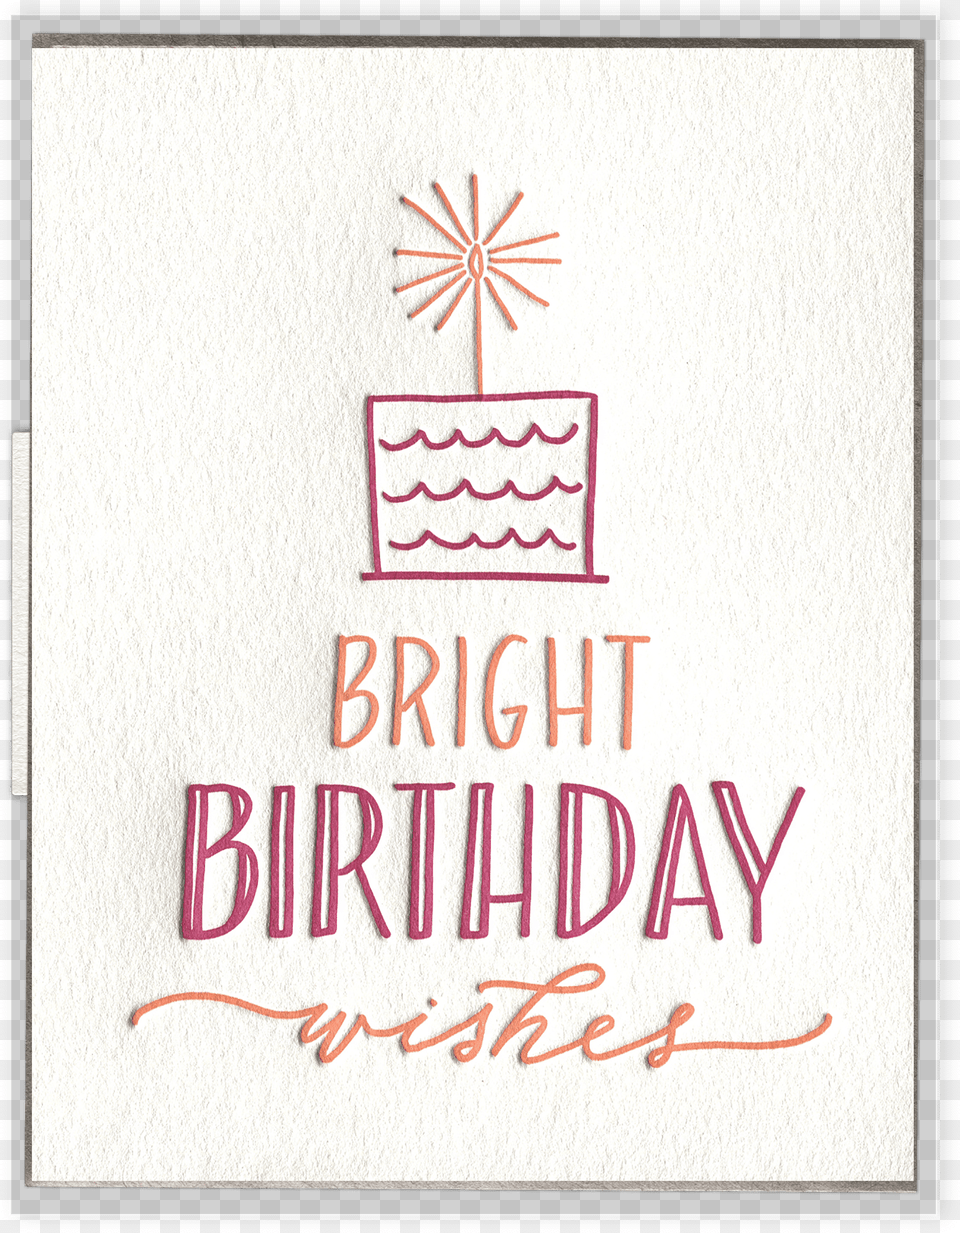 Bright Birthday Wishes Letterpress Greeting Card, Envelope, Greeting Card, Mail, Text Png